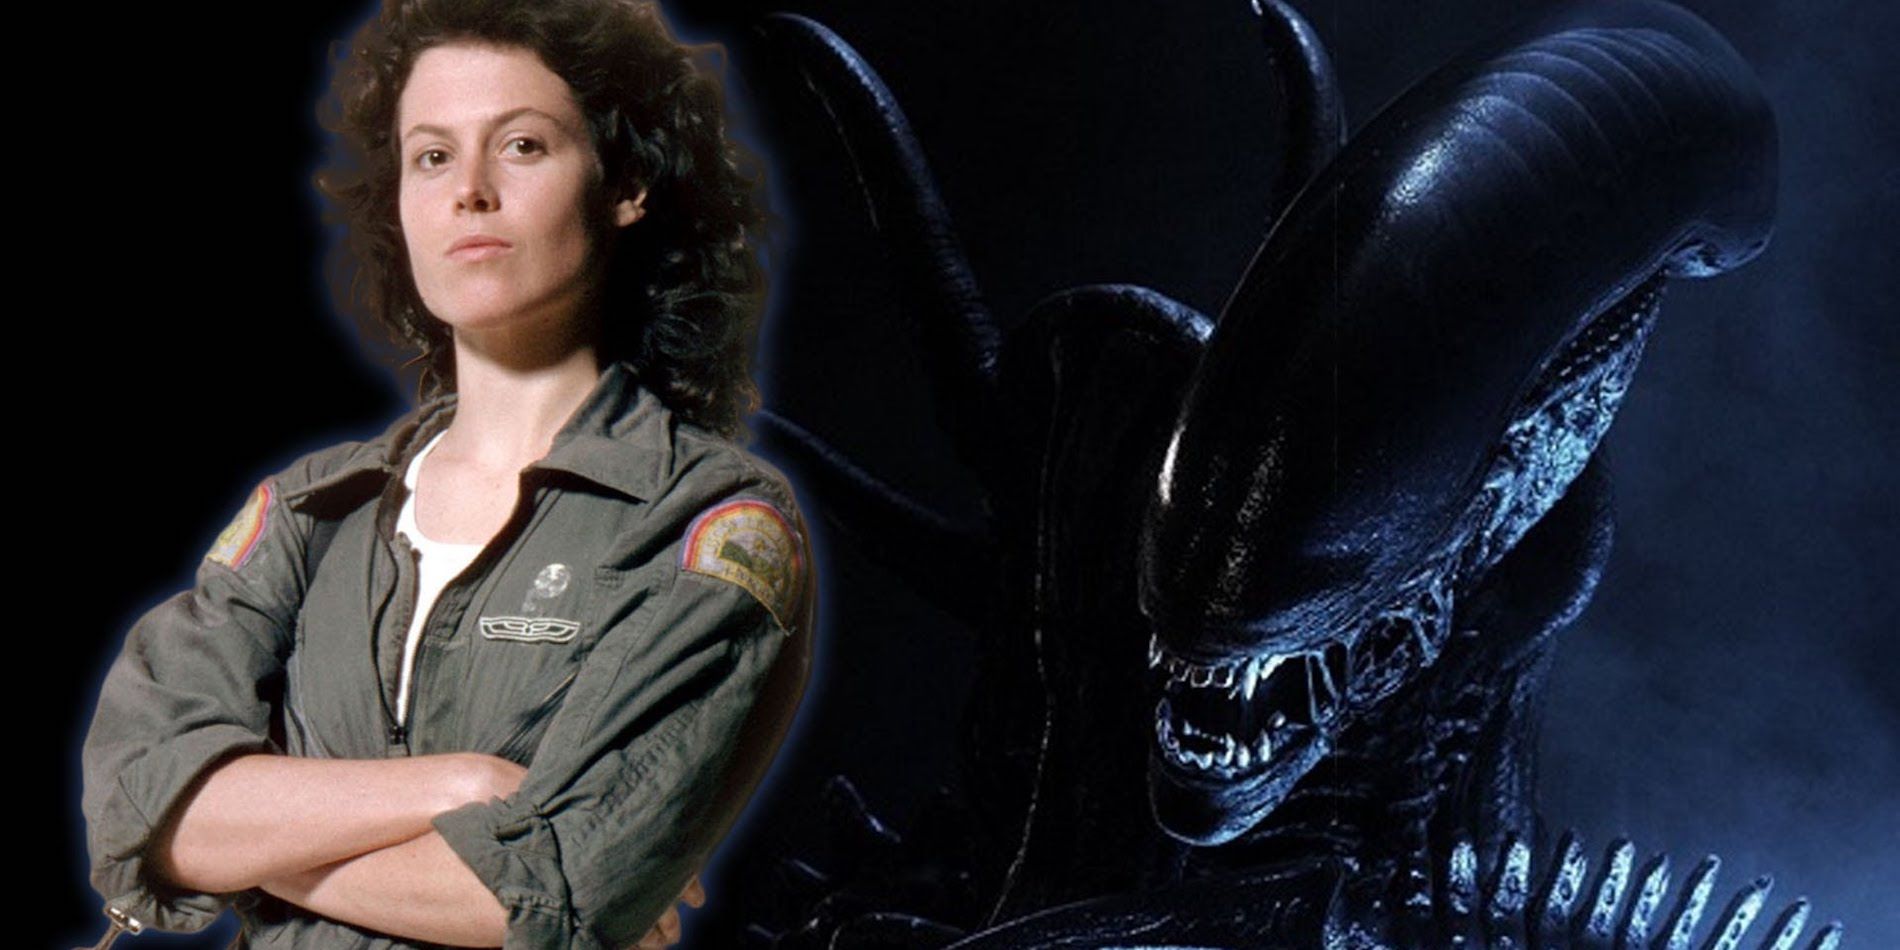 Sigourney Weaver as Ripley and a xenomorph from the Alien franchise